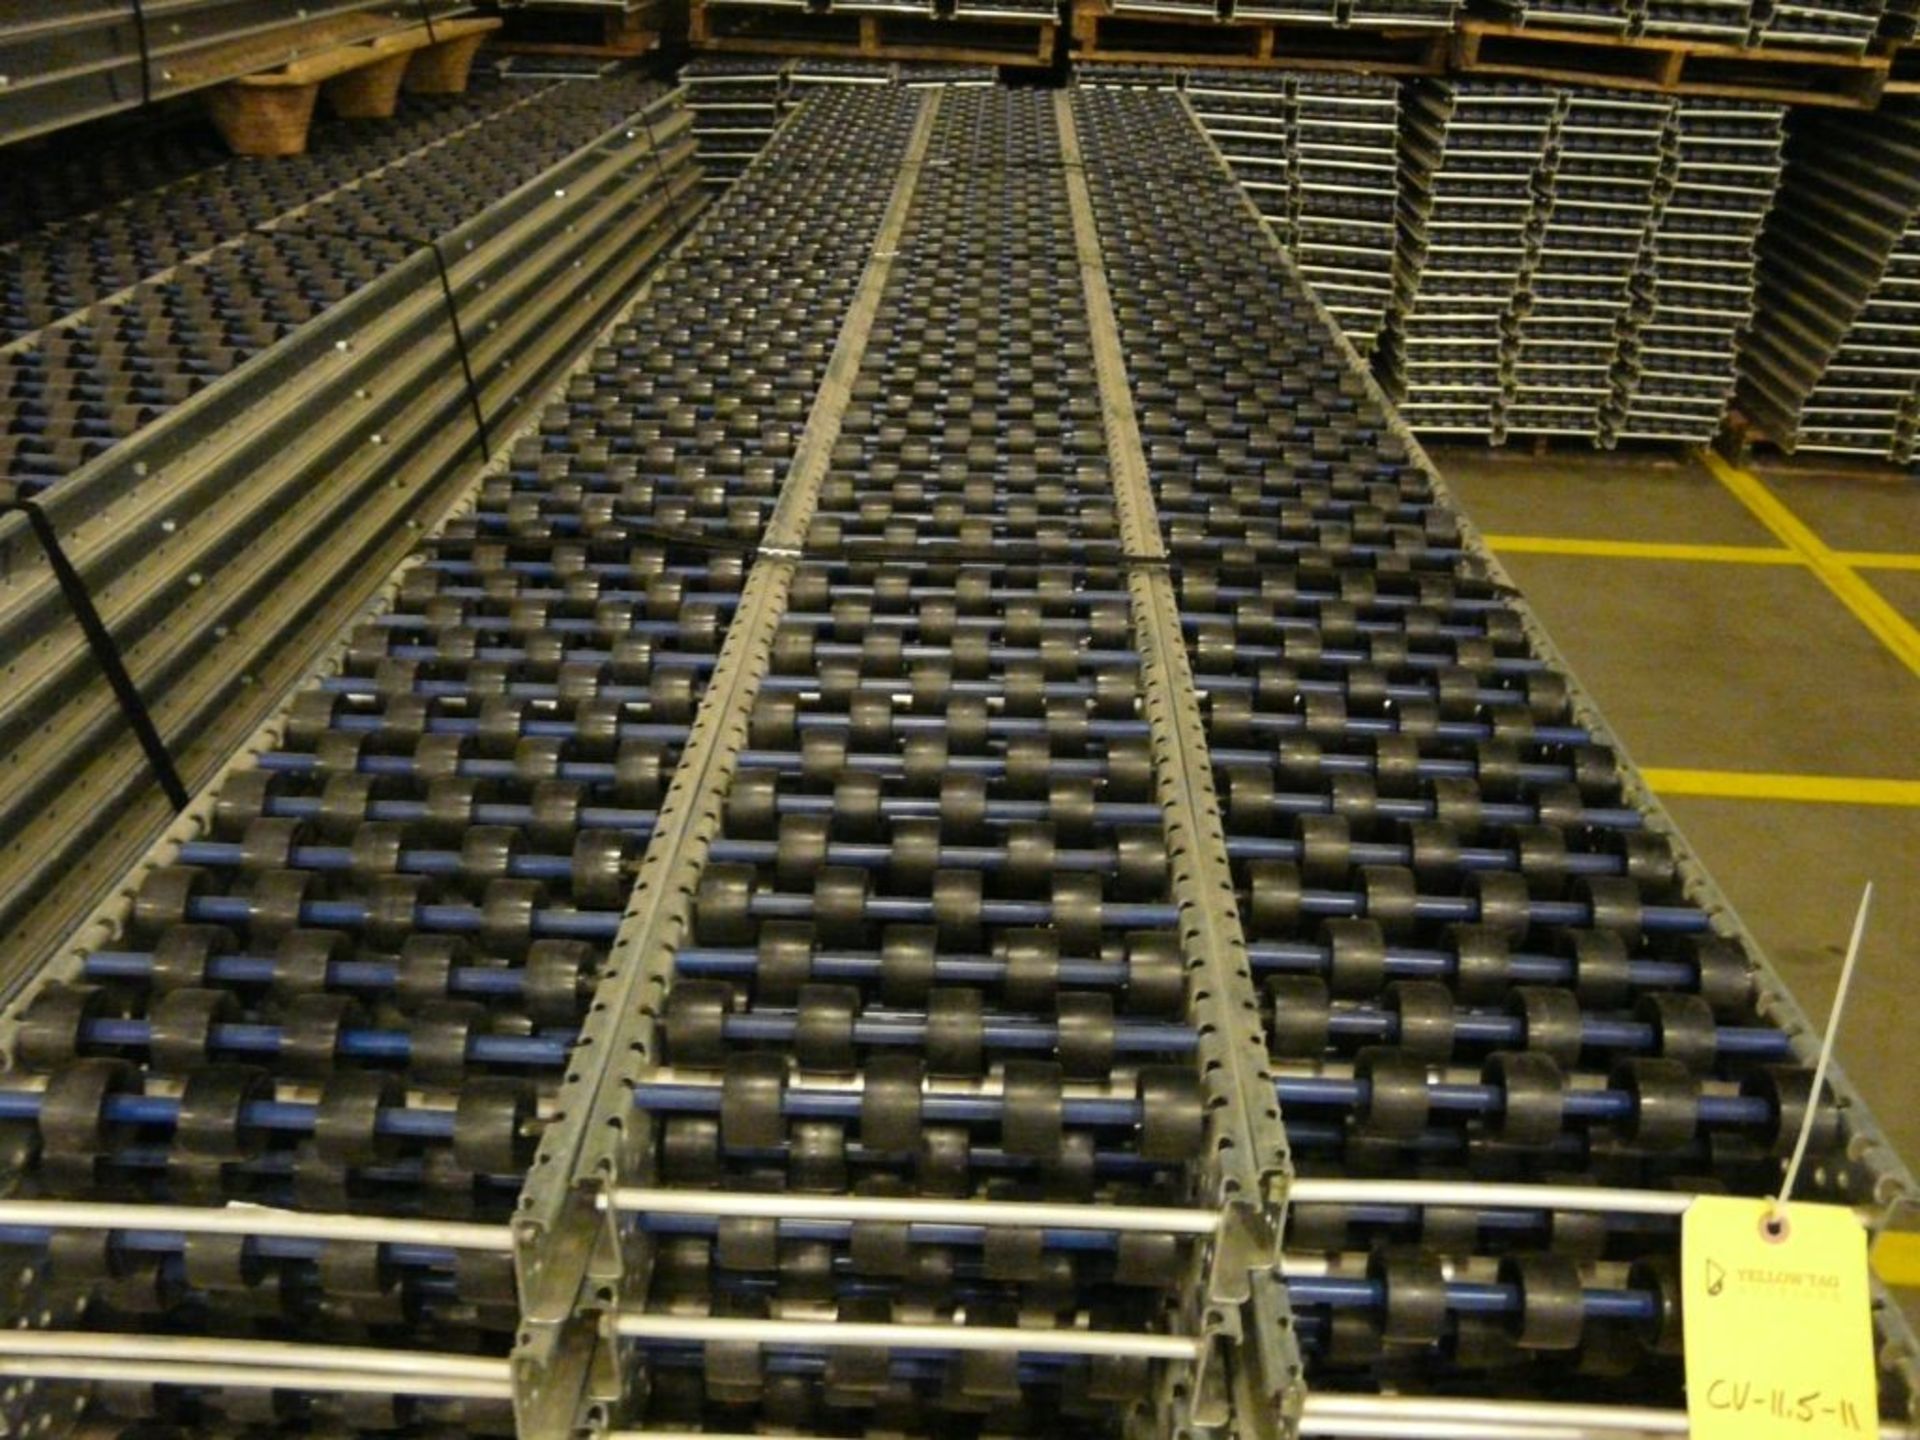 Lot of (90) SpanTrack Wheelbed Carton Flow Conveyors - 11.5'L x 11"W; Tag: 224221 - $30 Lot - Image 3 of 4